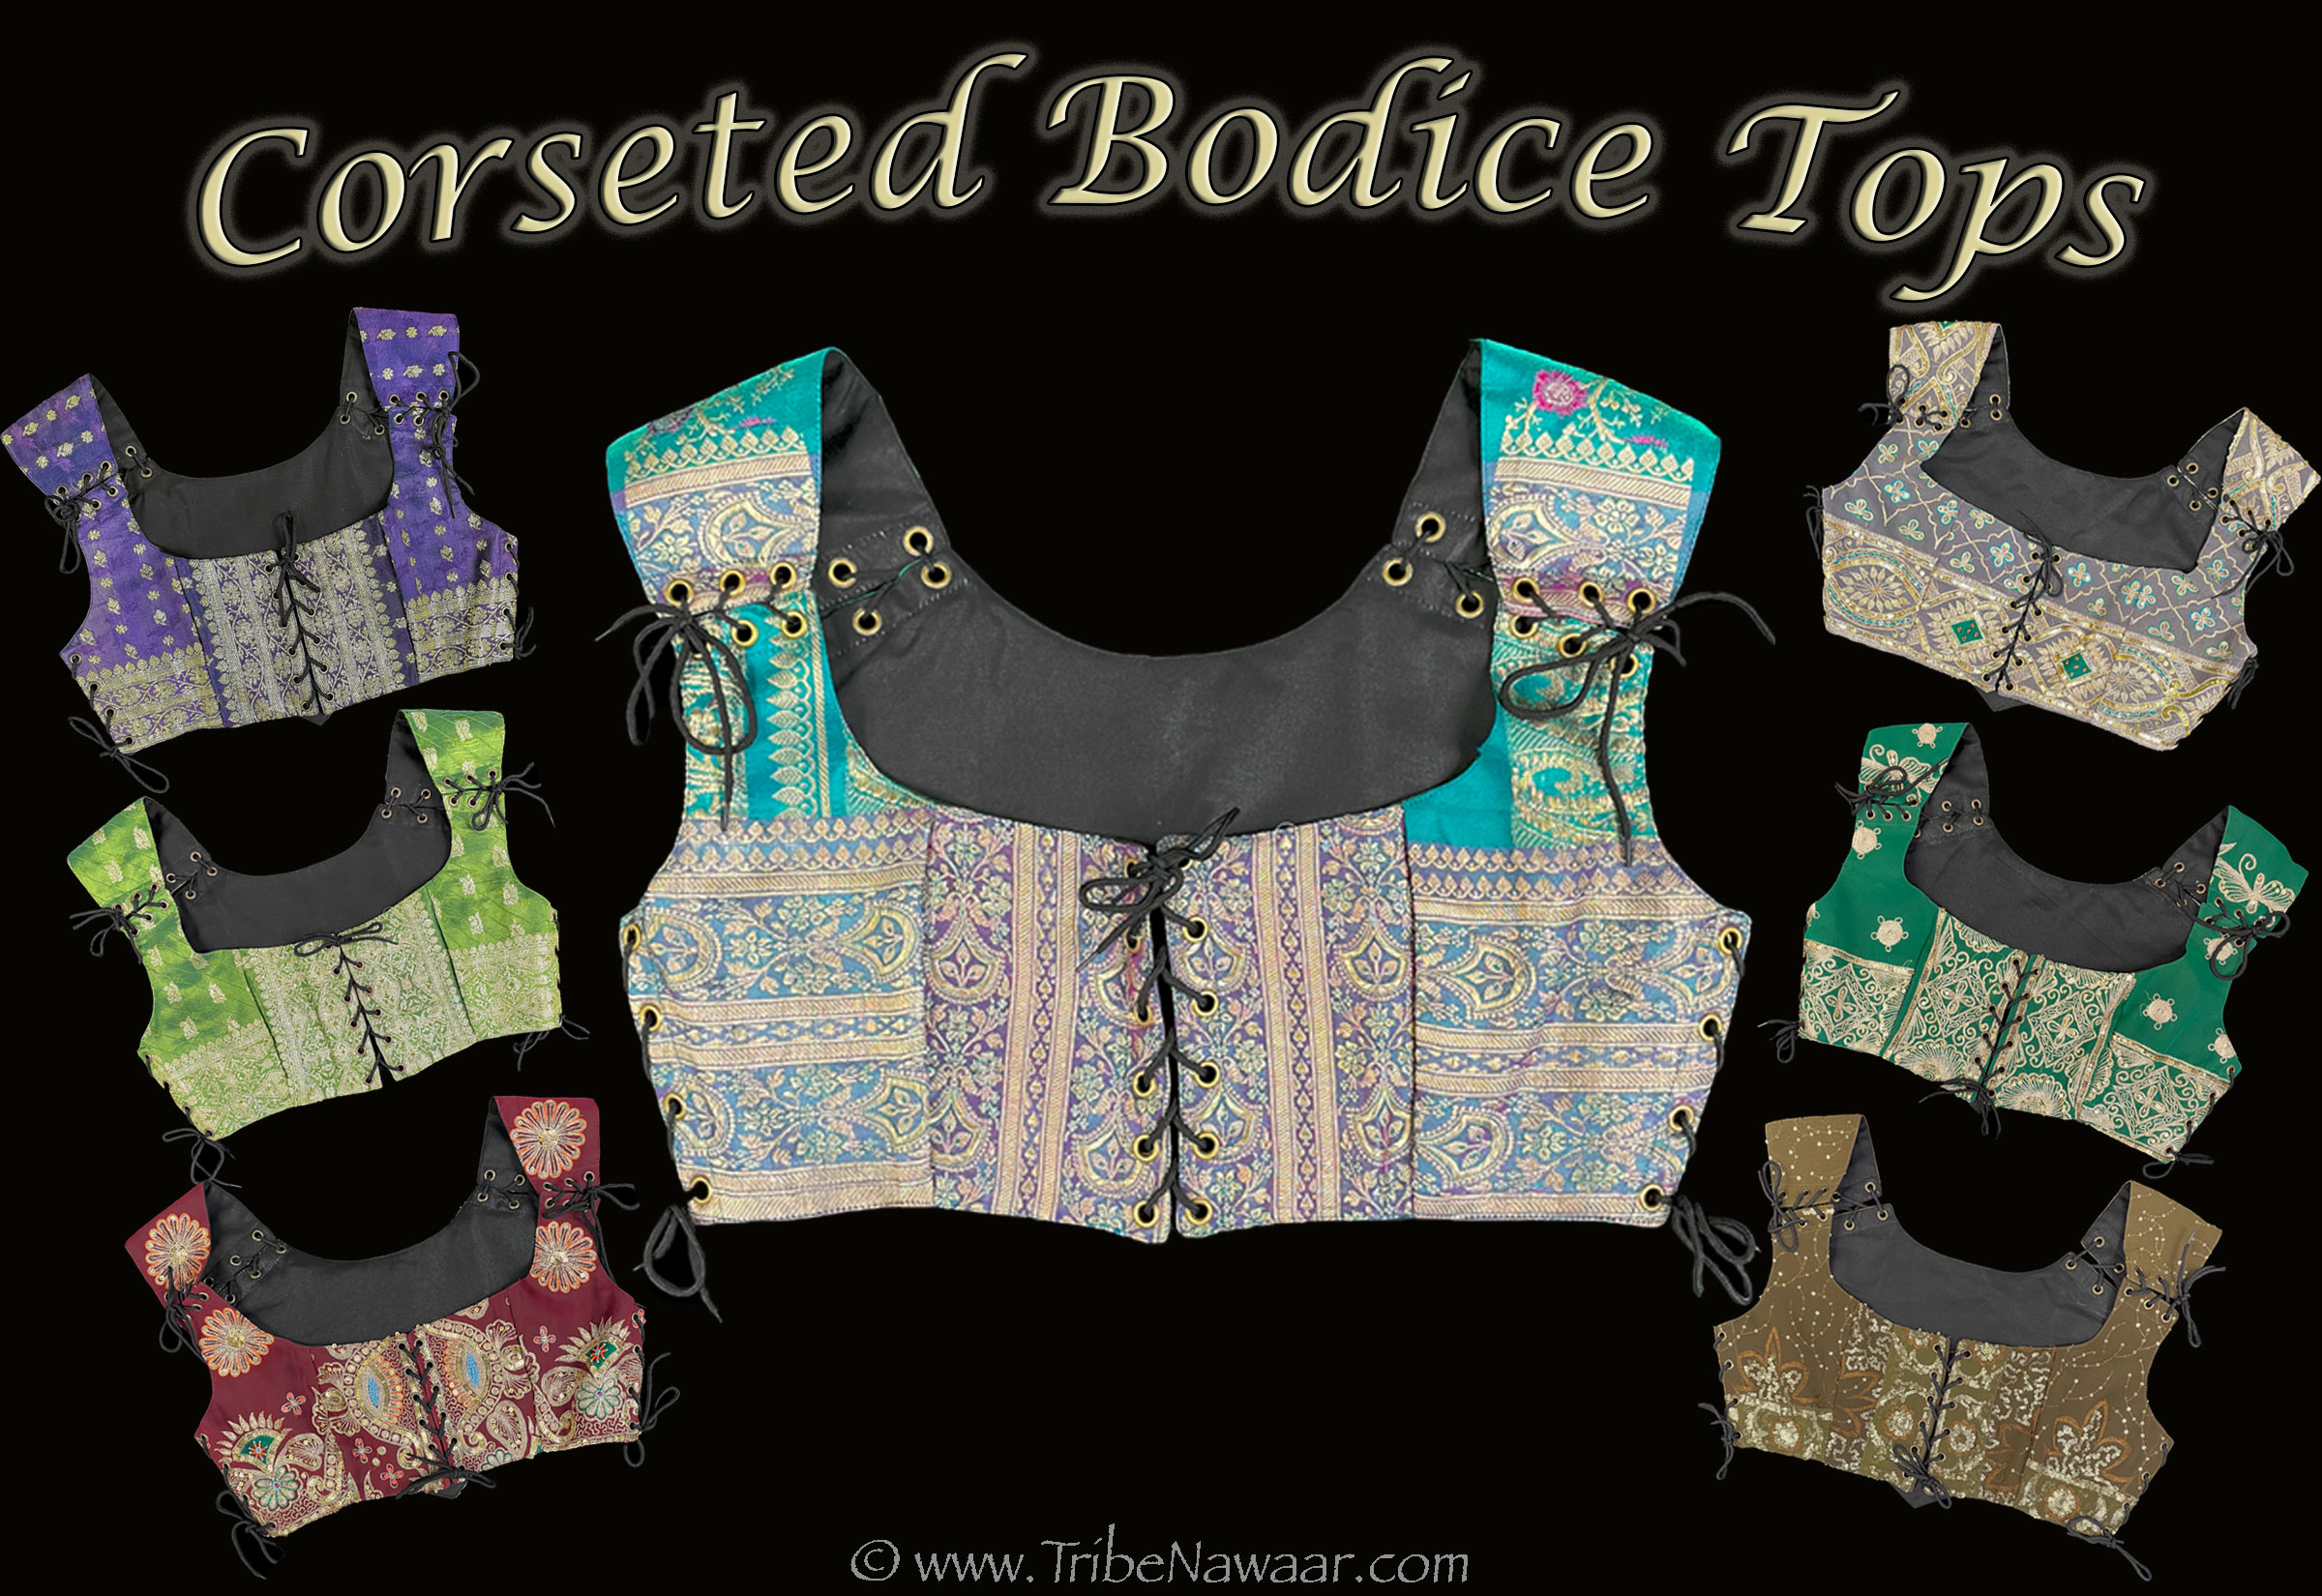 New corseted bodice tops for belly dance, renaissance and medieval costumes- new colors at www.TribeNawaar.com